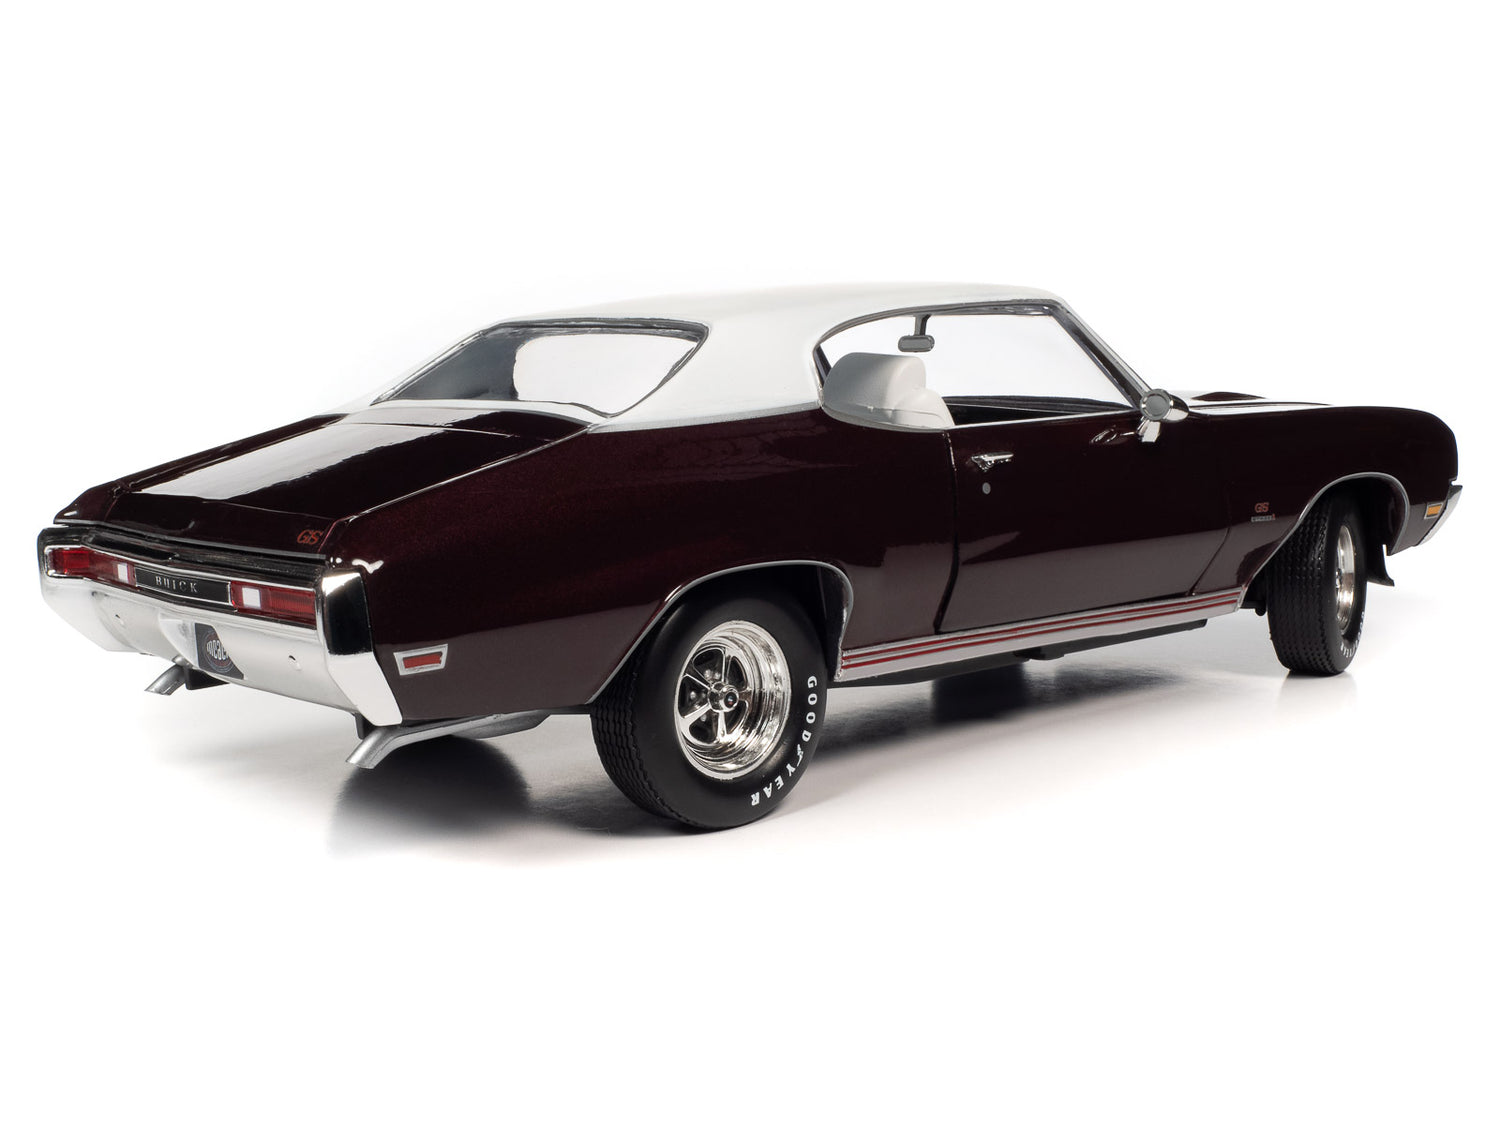 American Muscle 1970 Buick GS Stage 1 Hardtop (MCACN) 1:18 Scale Diecast